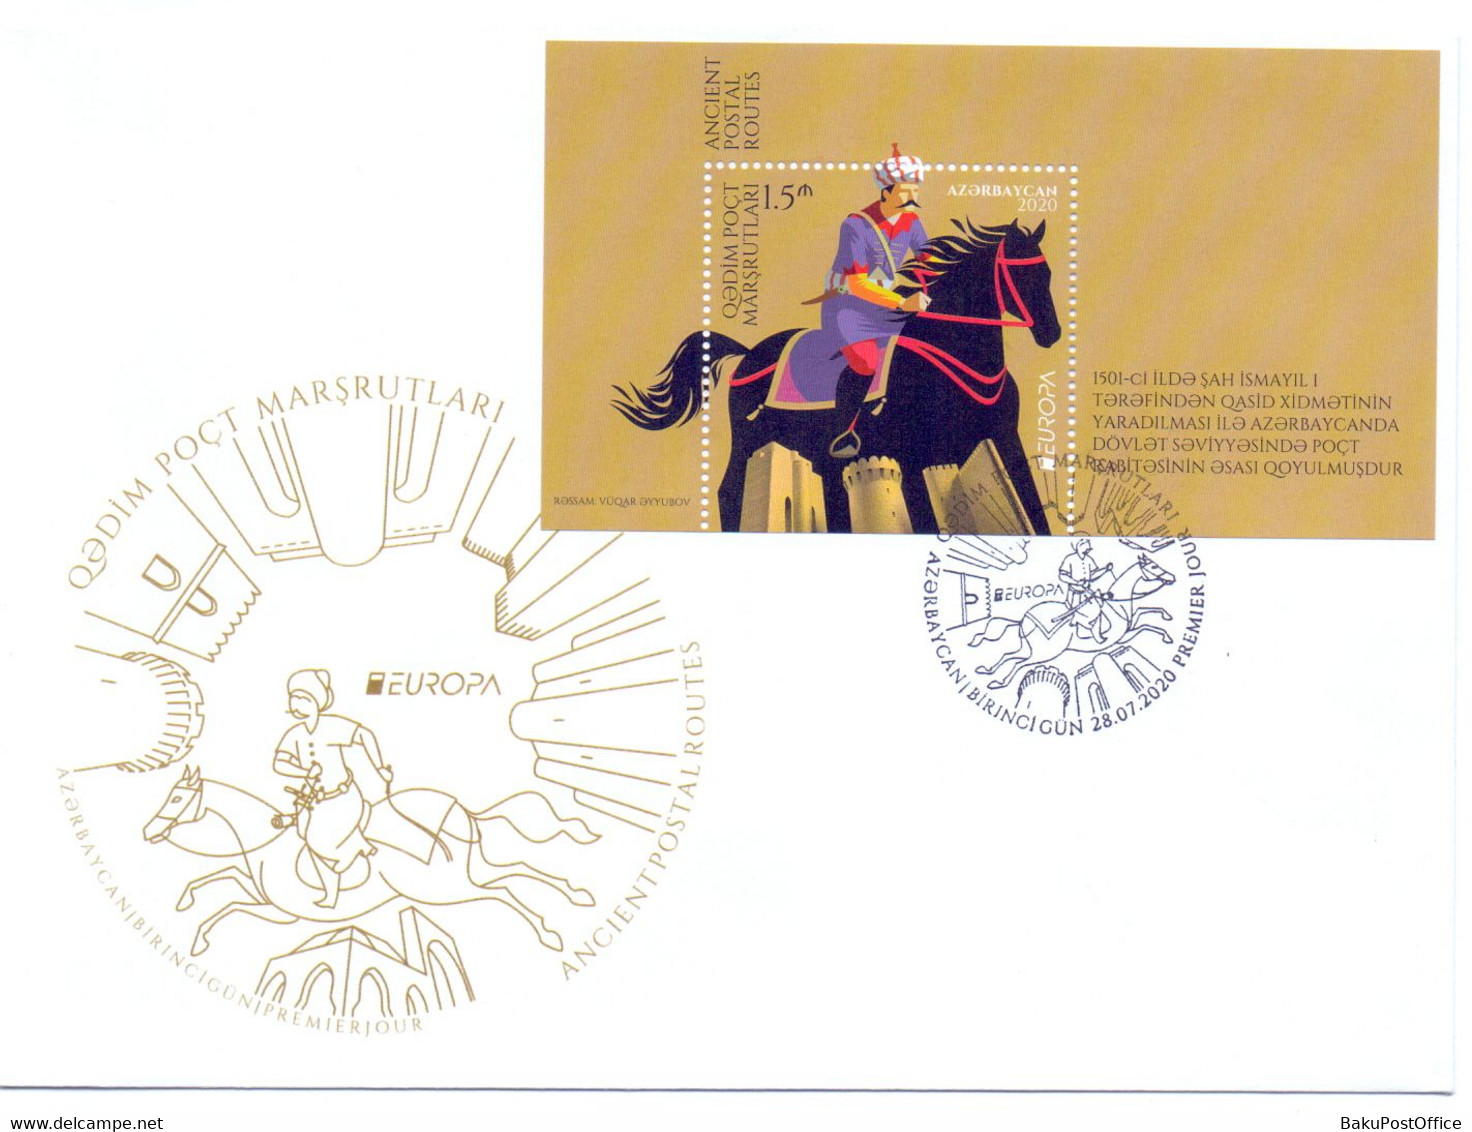 2 FDC CEPT Ancient Postal Routes EUROPA EUROPE 2020 Azerbaijan Stamps First Day Cover - 2020